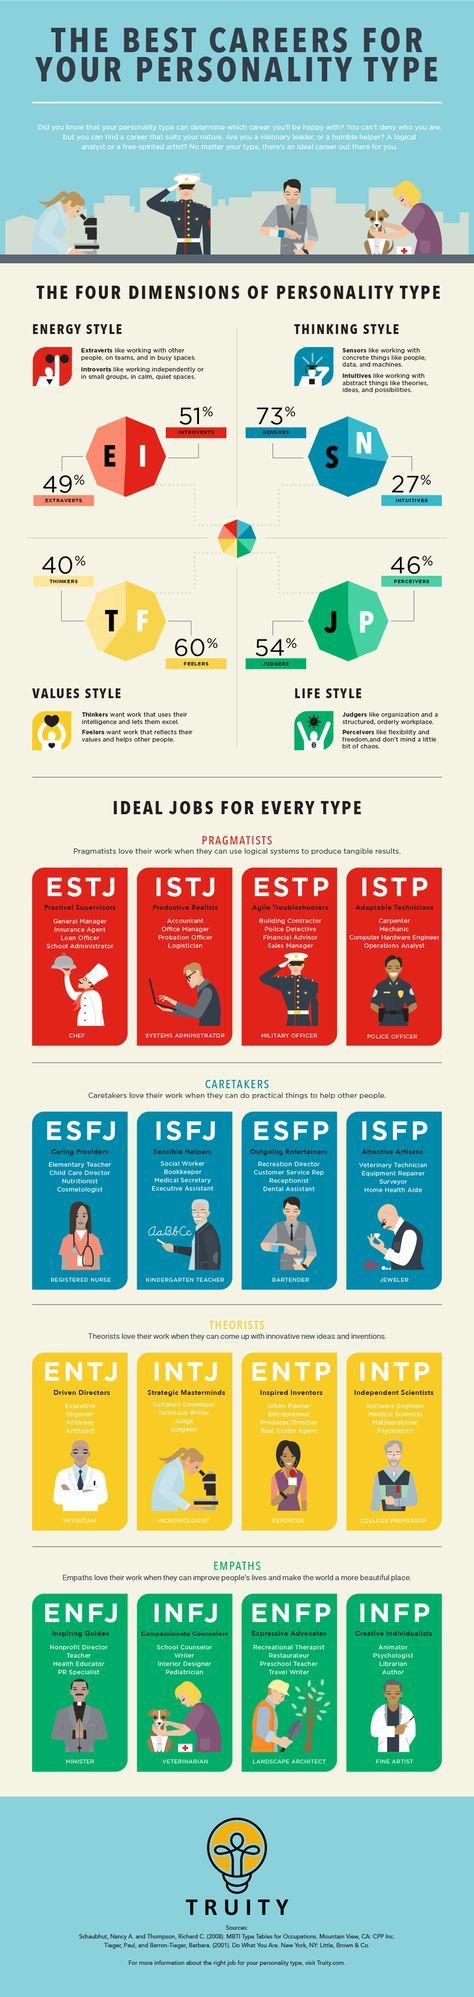 Infographic-The-Best-Career-for-Your-Personality-Type-Infographic Infographic : The Best Career for Your Personality Type Infographic